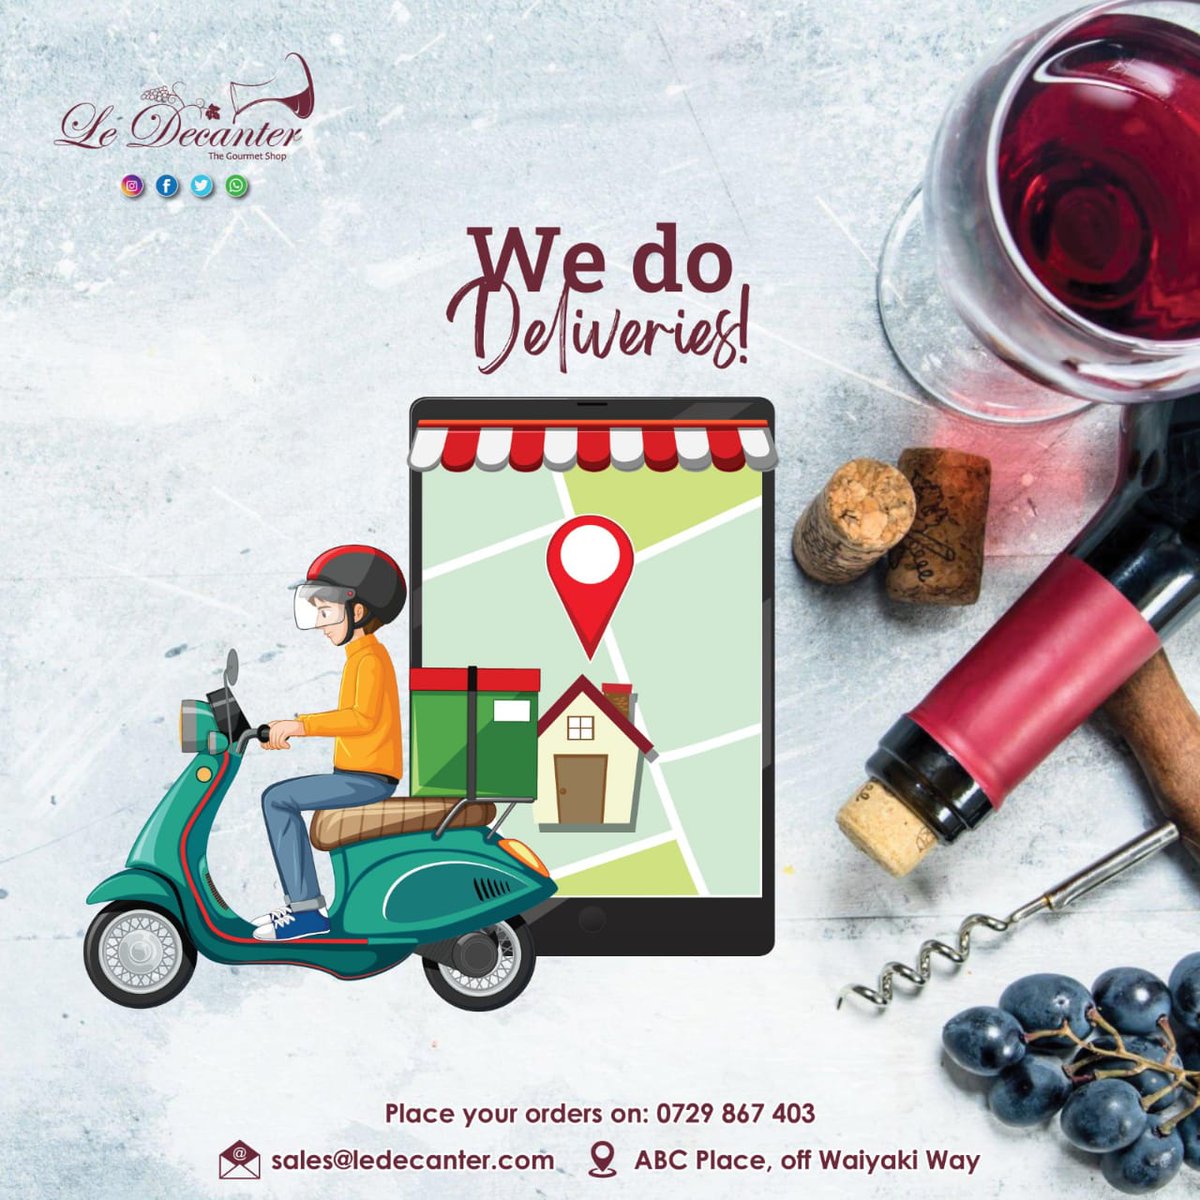 You don't feel like leaving the house? Worry no more. We offer deliveries to your doorstep but at a small extra cost as per your location. To order kindly Call / WhatsApp us on 0729867403 Email us on sales@ledecanter.com #ledecanter #ledecanterwines